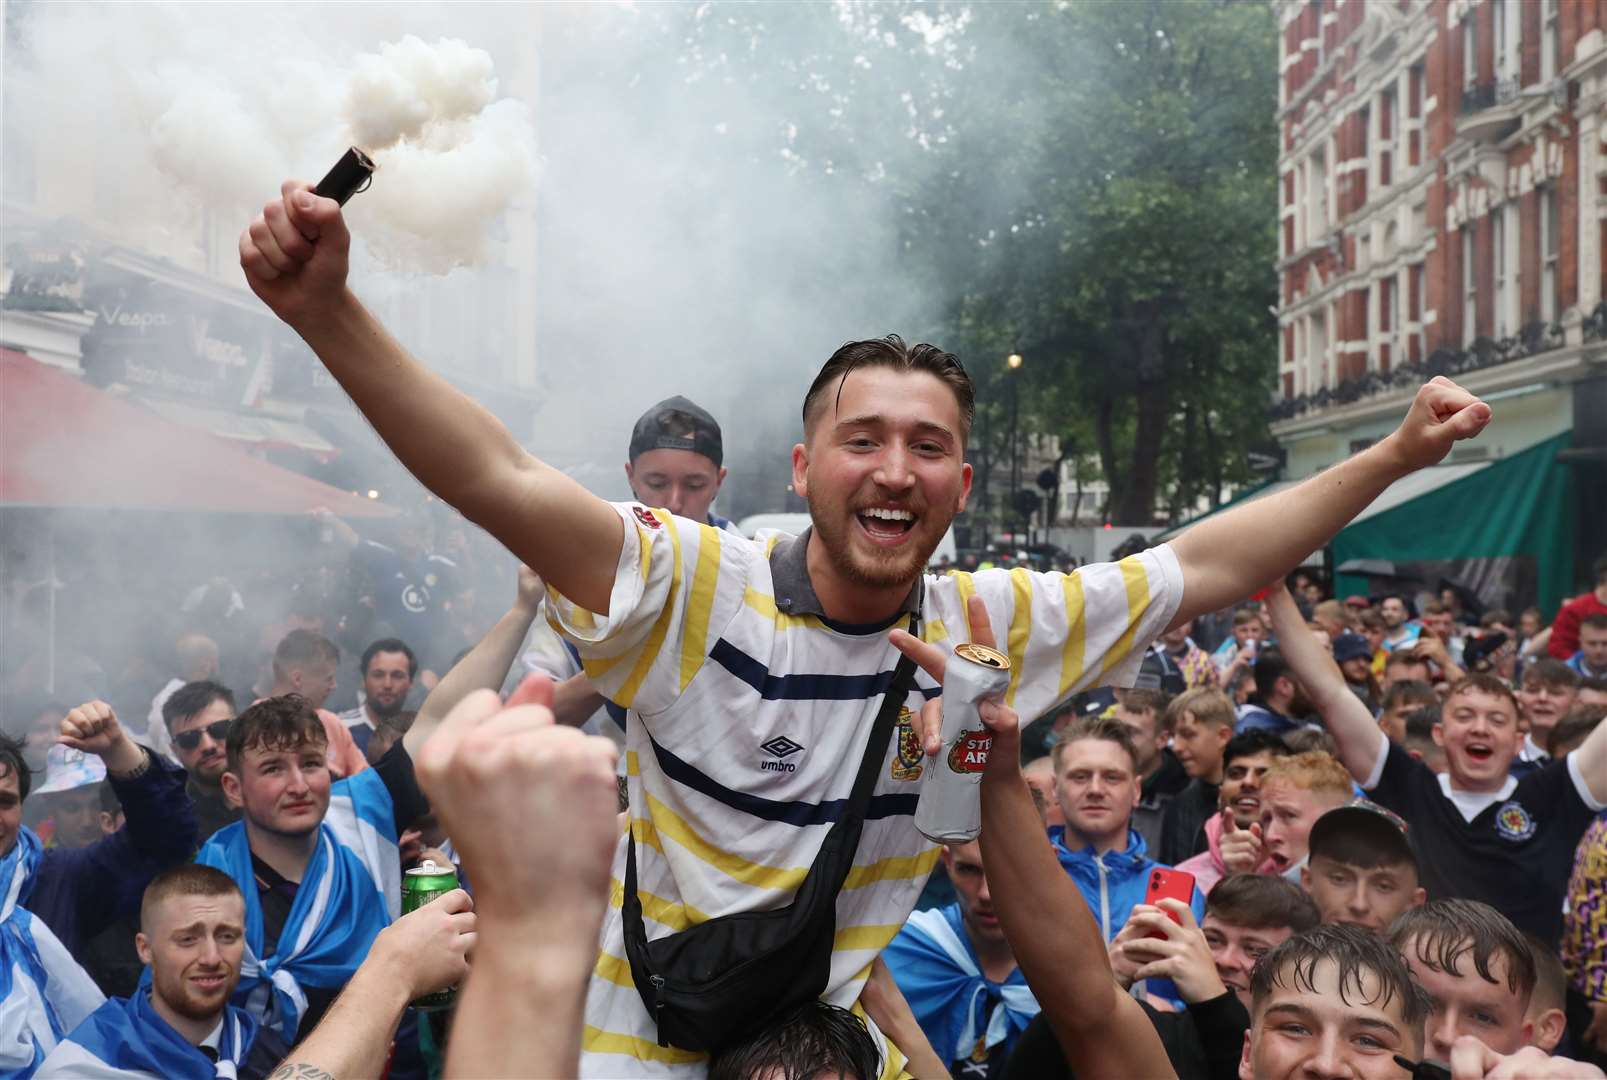 Scotland fans gather in Leicester Square before the Euro 2020 match between England and Scotland later tonight (Kieran Cleeves/PA)